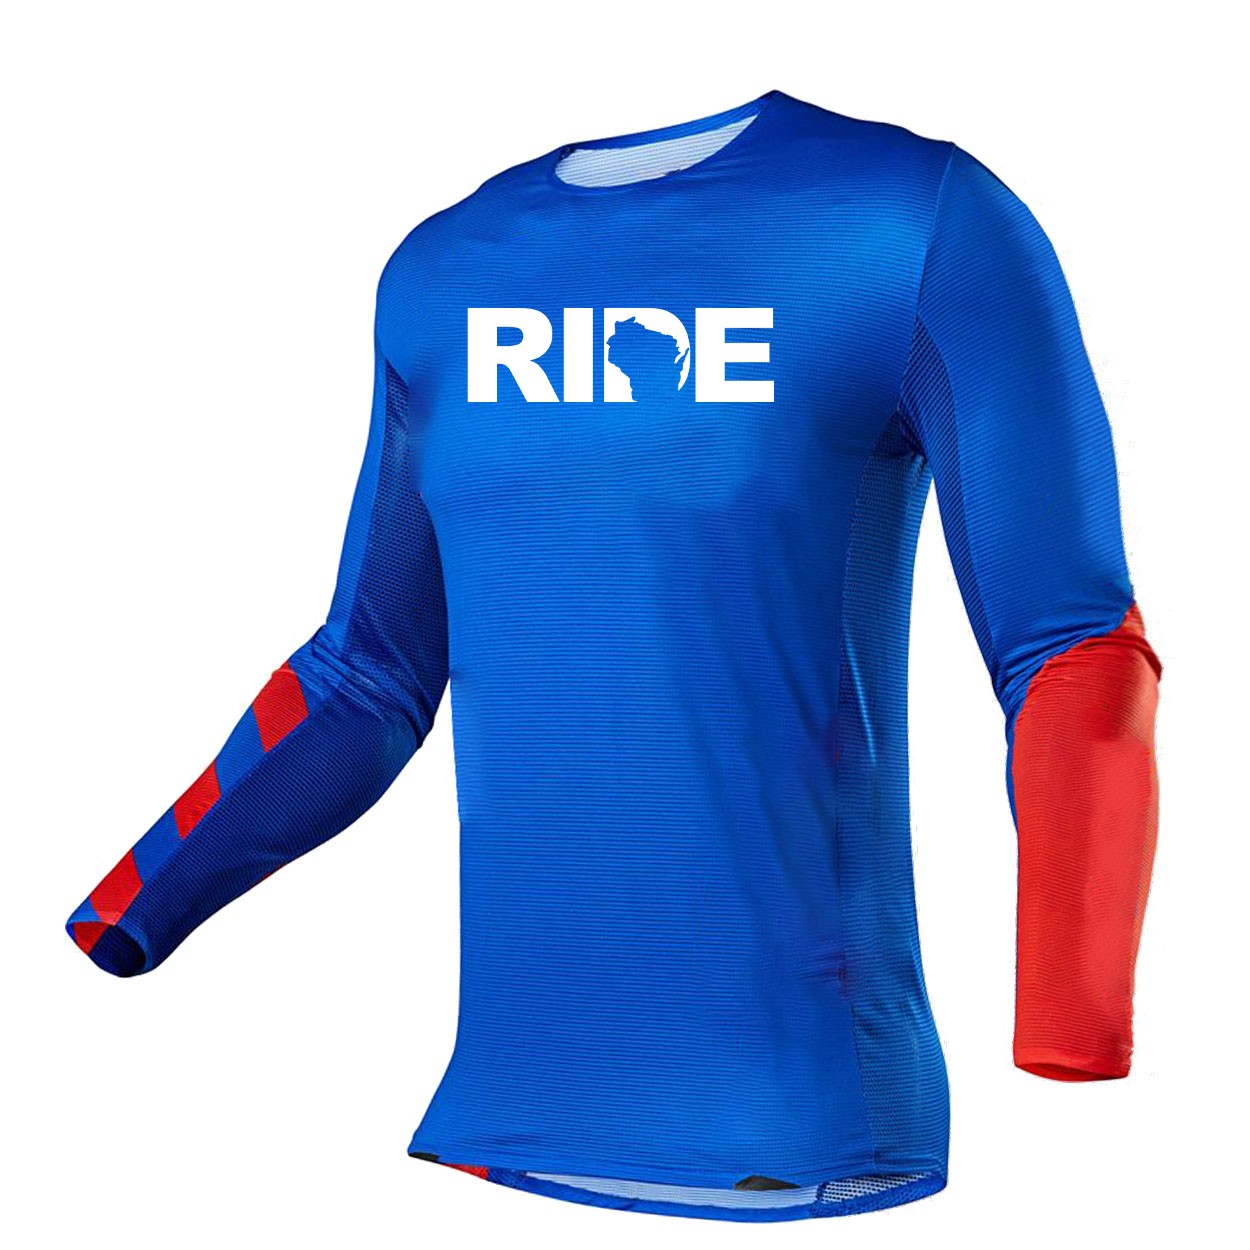 Ride Wisconsin Classic Performance Jersey Long Sleeve Shirt Blue/Red